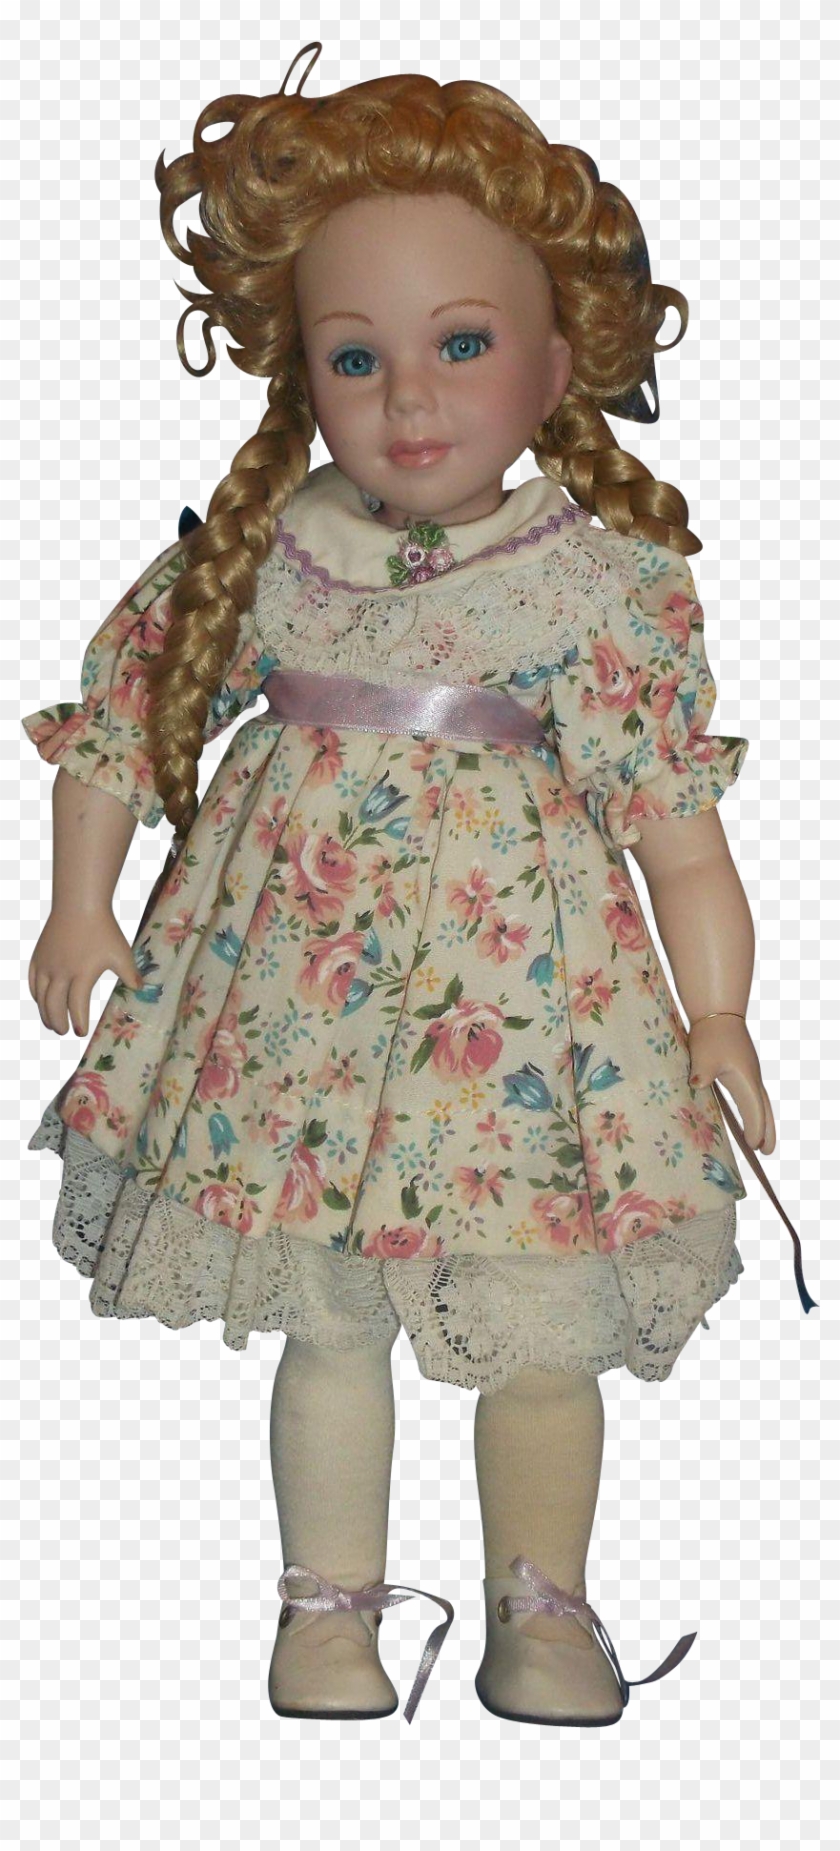 treasures in lace porcelain doll